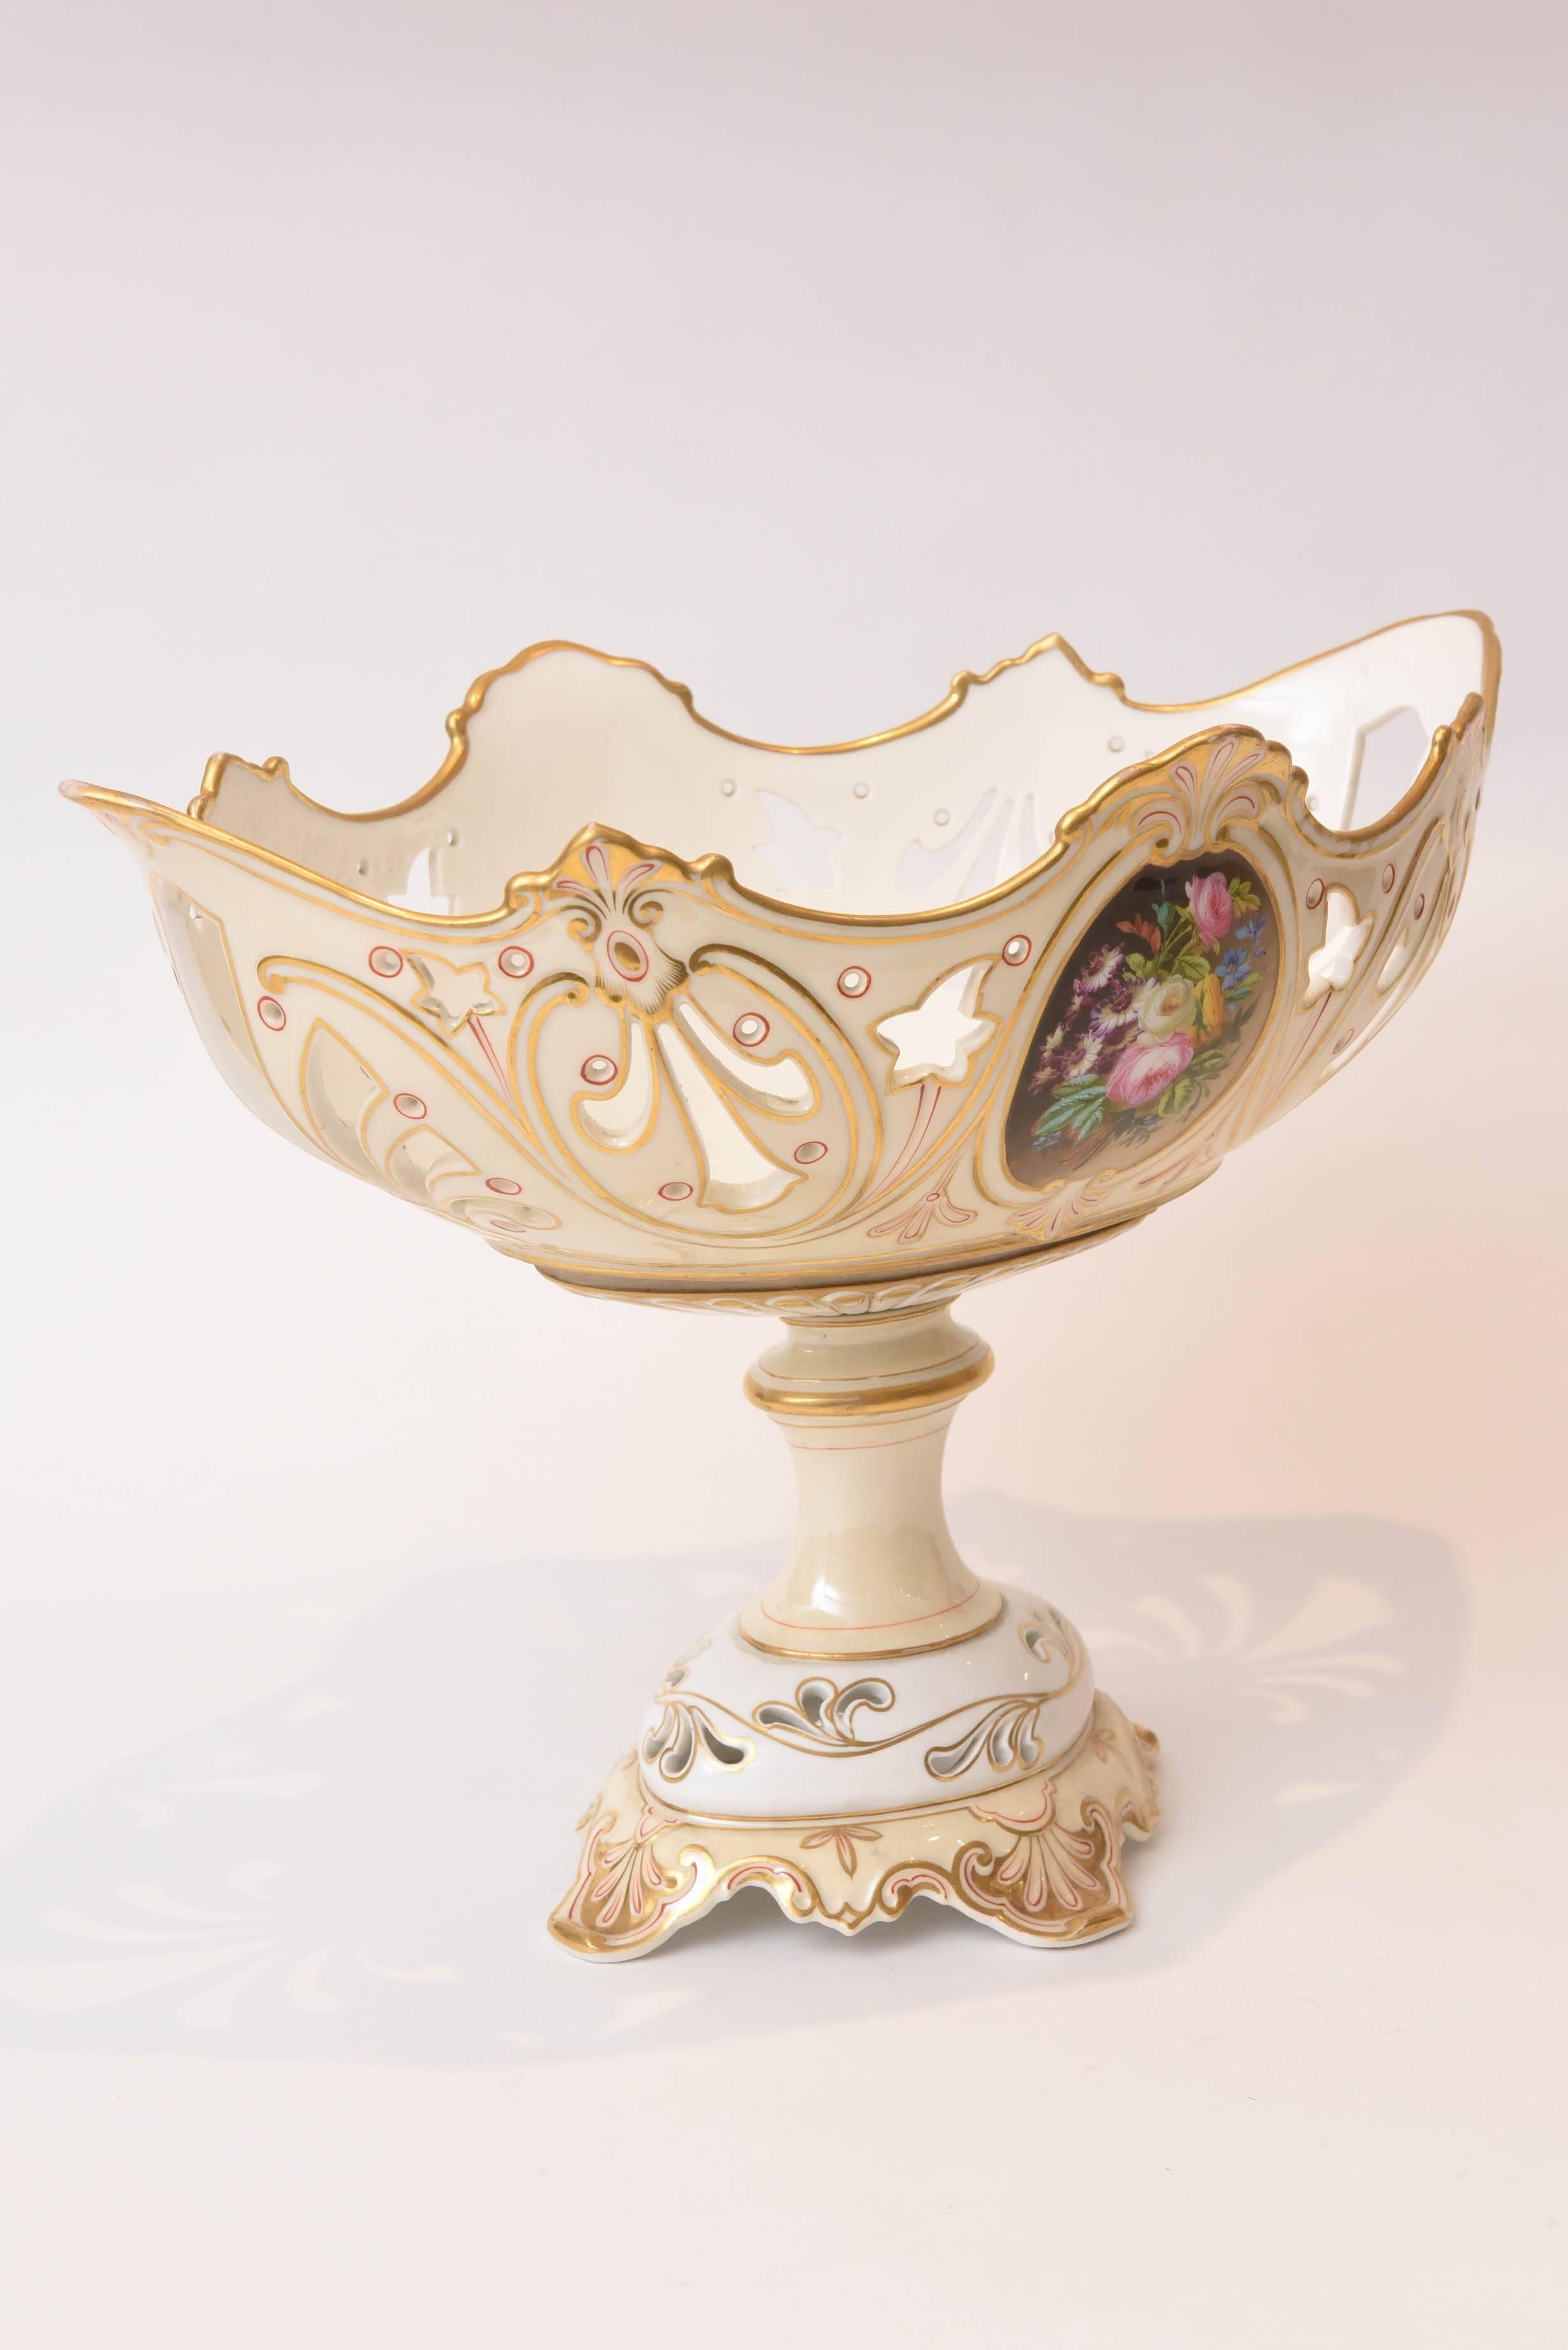 A stunning piece of Old Paris porcelain that features two sides of beautiful hand-painted floral panels, hand-cut work and hand-painted trim. Nicely shaped with a long and deep boat shaped bowl and a nice tall pedestal base. While we find no